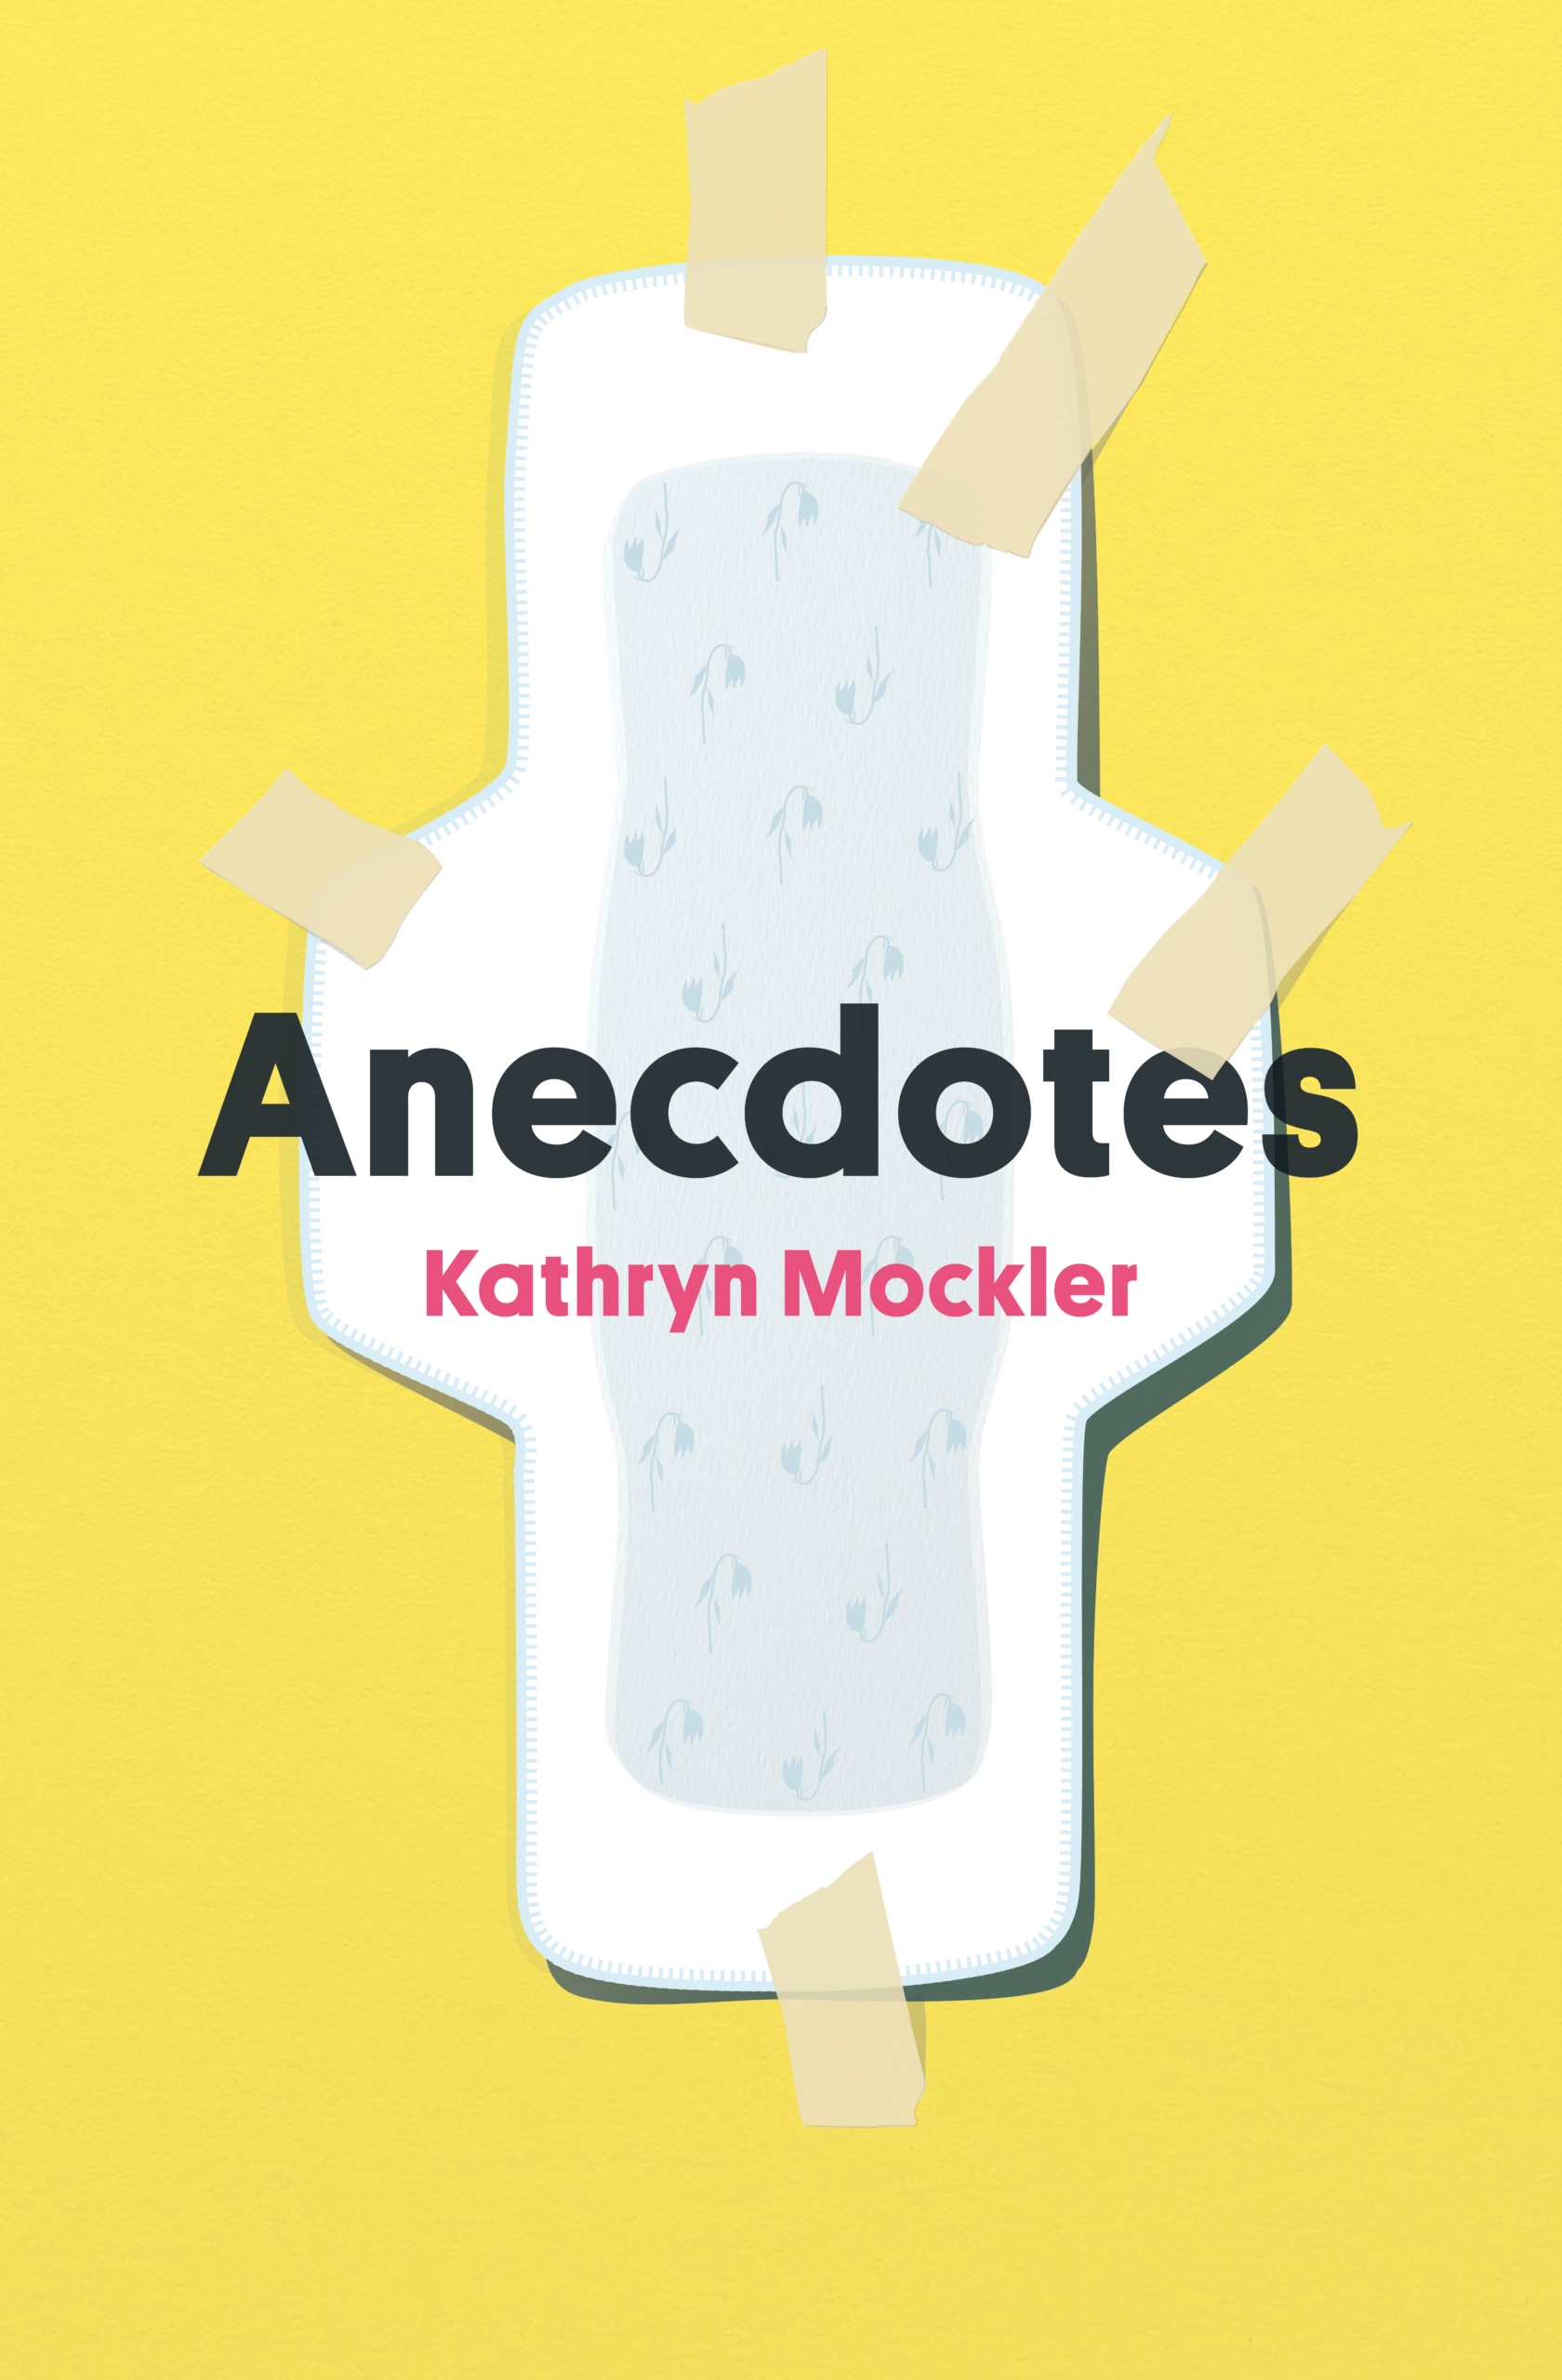 The cover of Anecdotes by Kathryn Mockler. The text sits over an illustration of a sanitary pad, taped up against a bold yellow background.